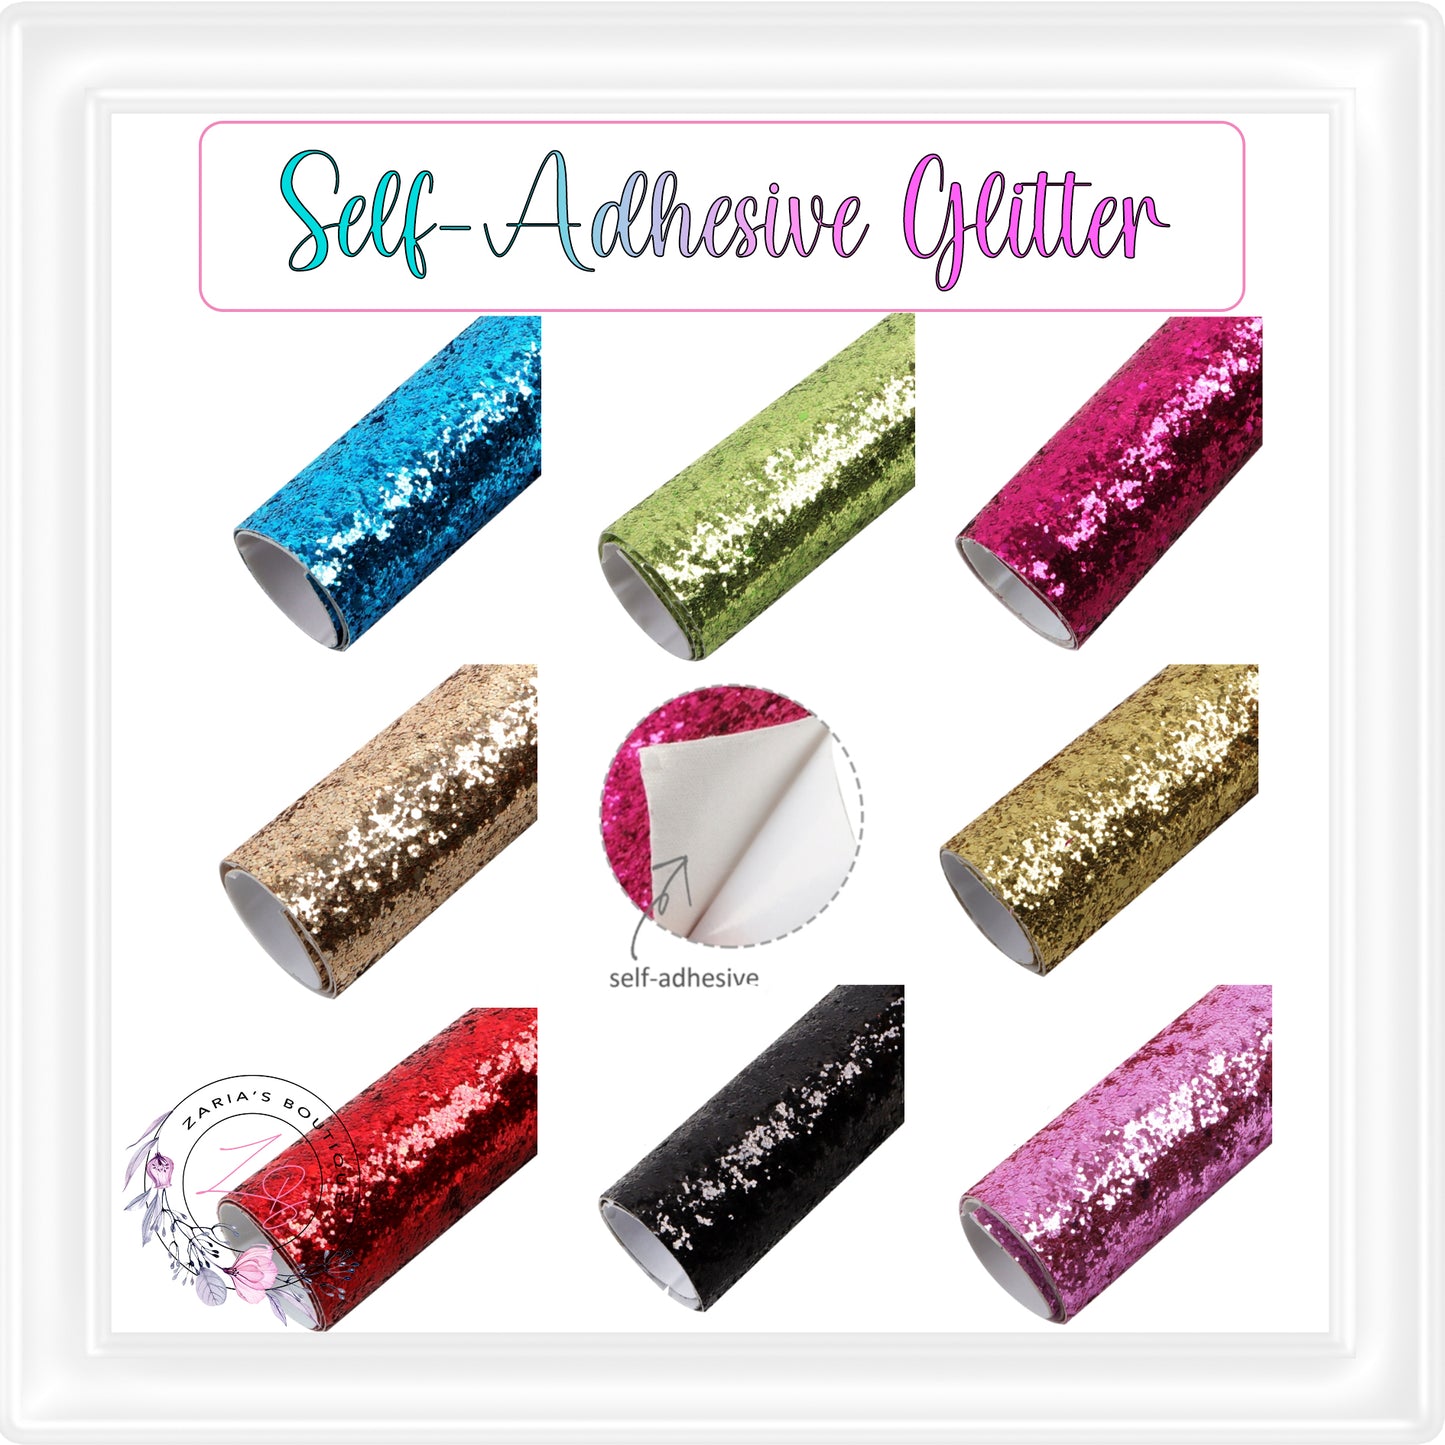 ⋅ Self-Adhesive Backed Medium Glitter ⋅ For Double-Sided Projects ⋅ GREEN ⋅